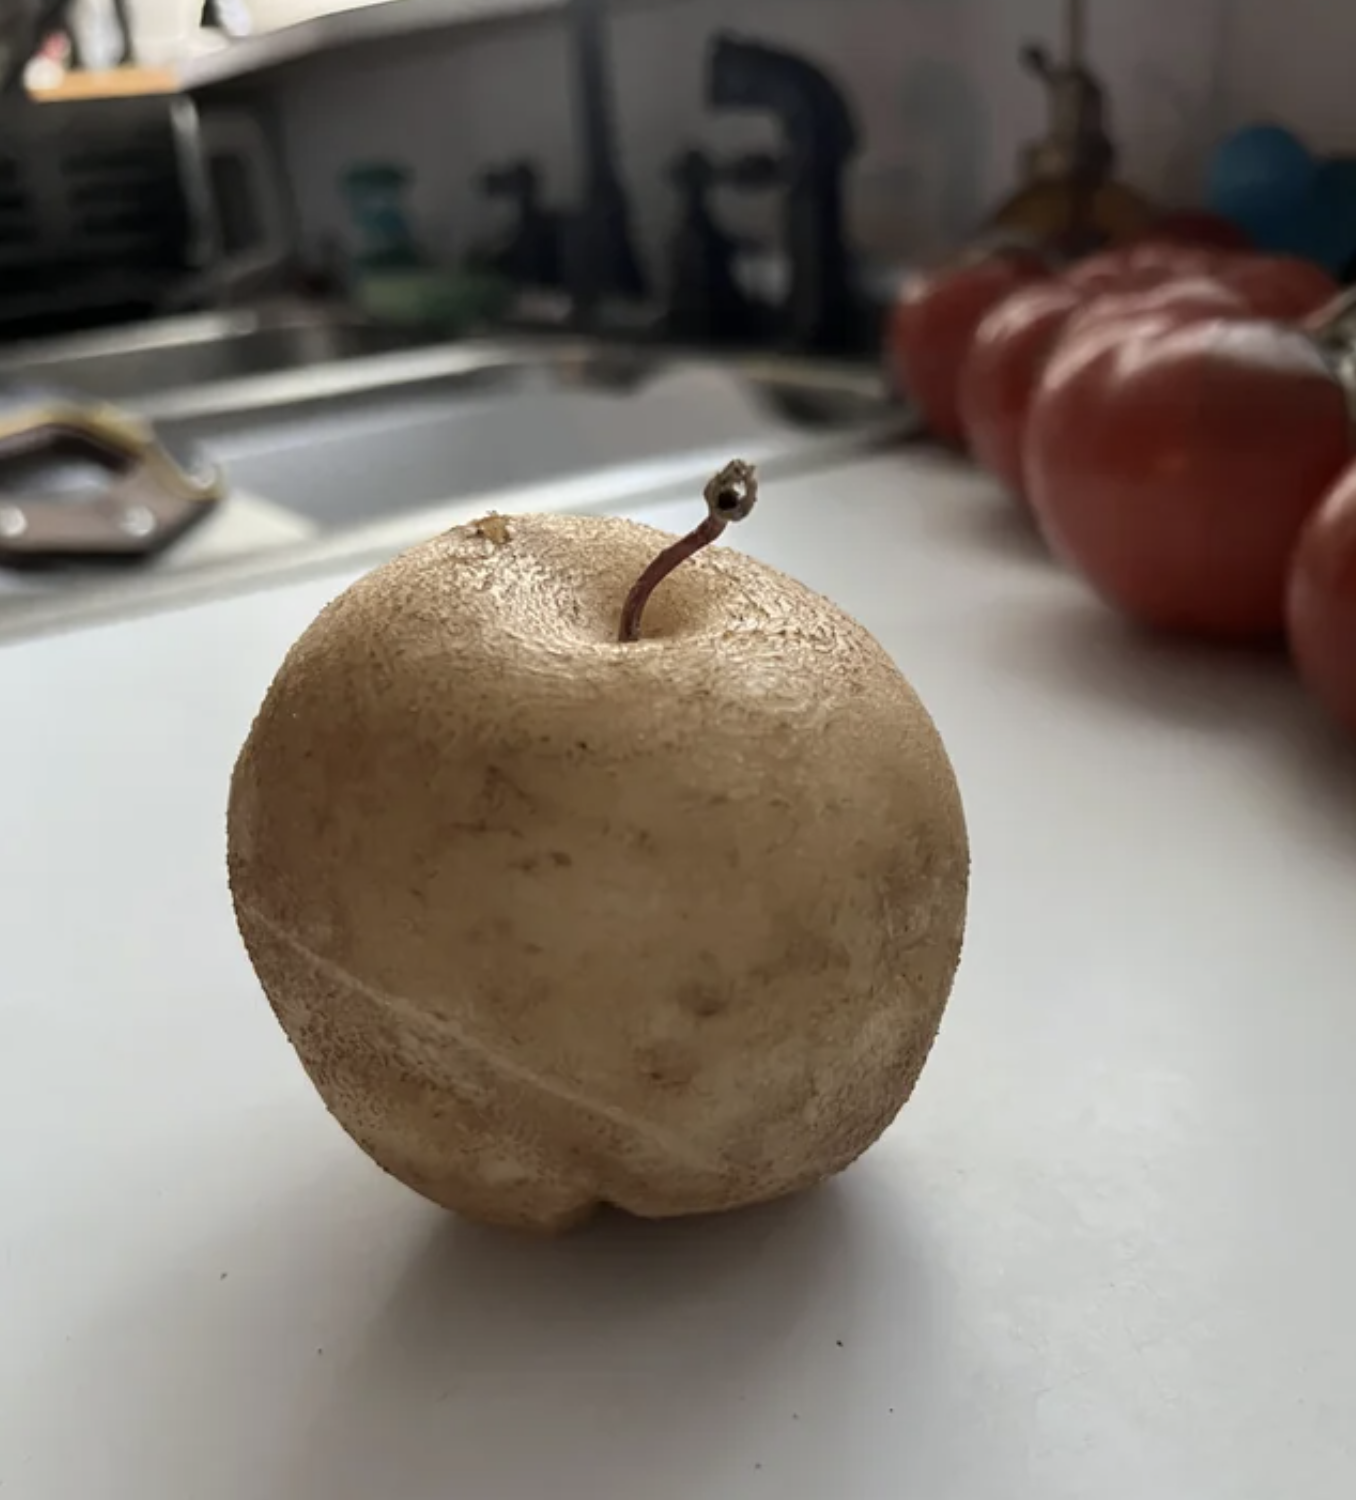 potato that looks like an apple on the counter